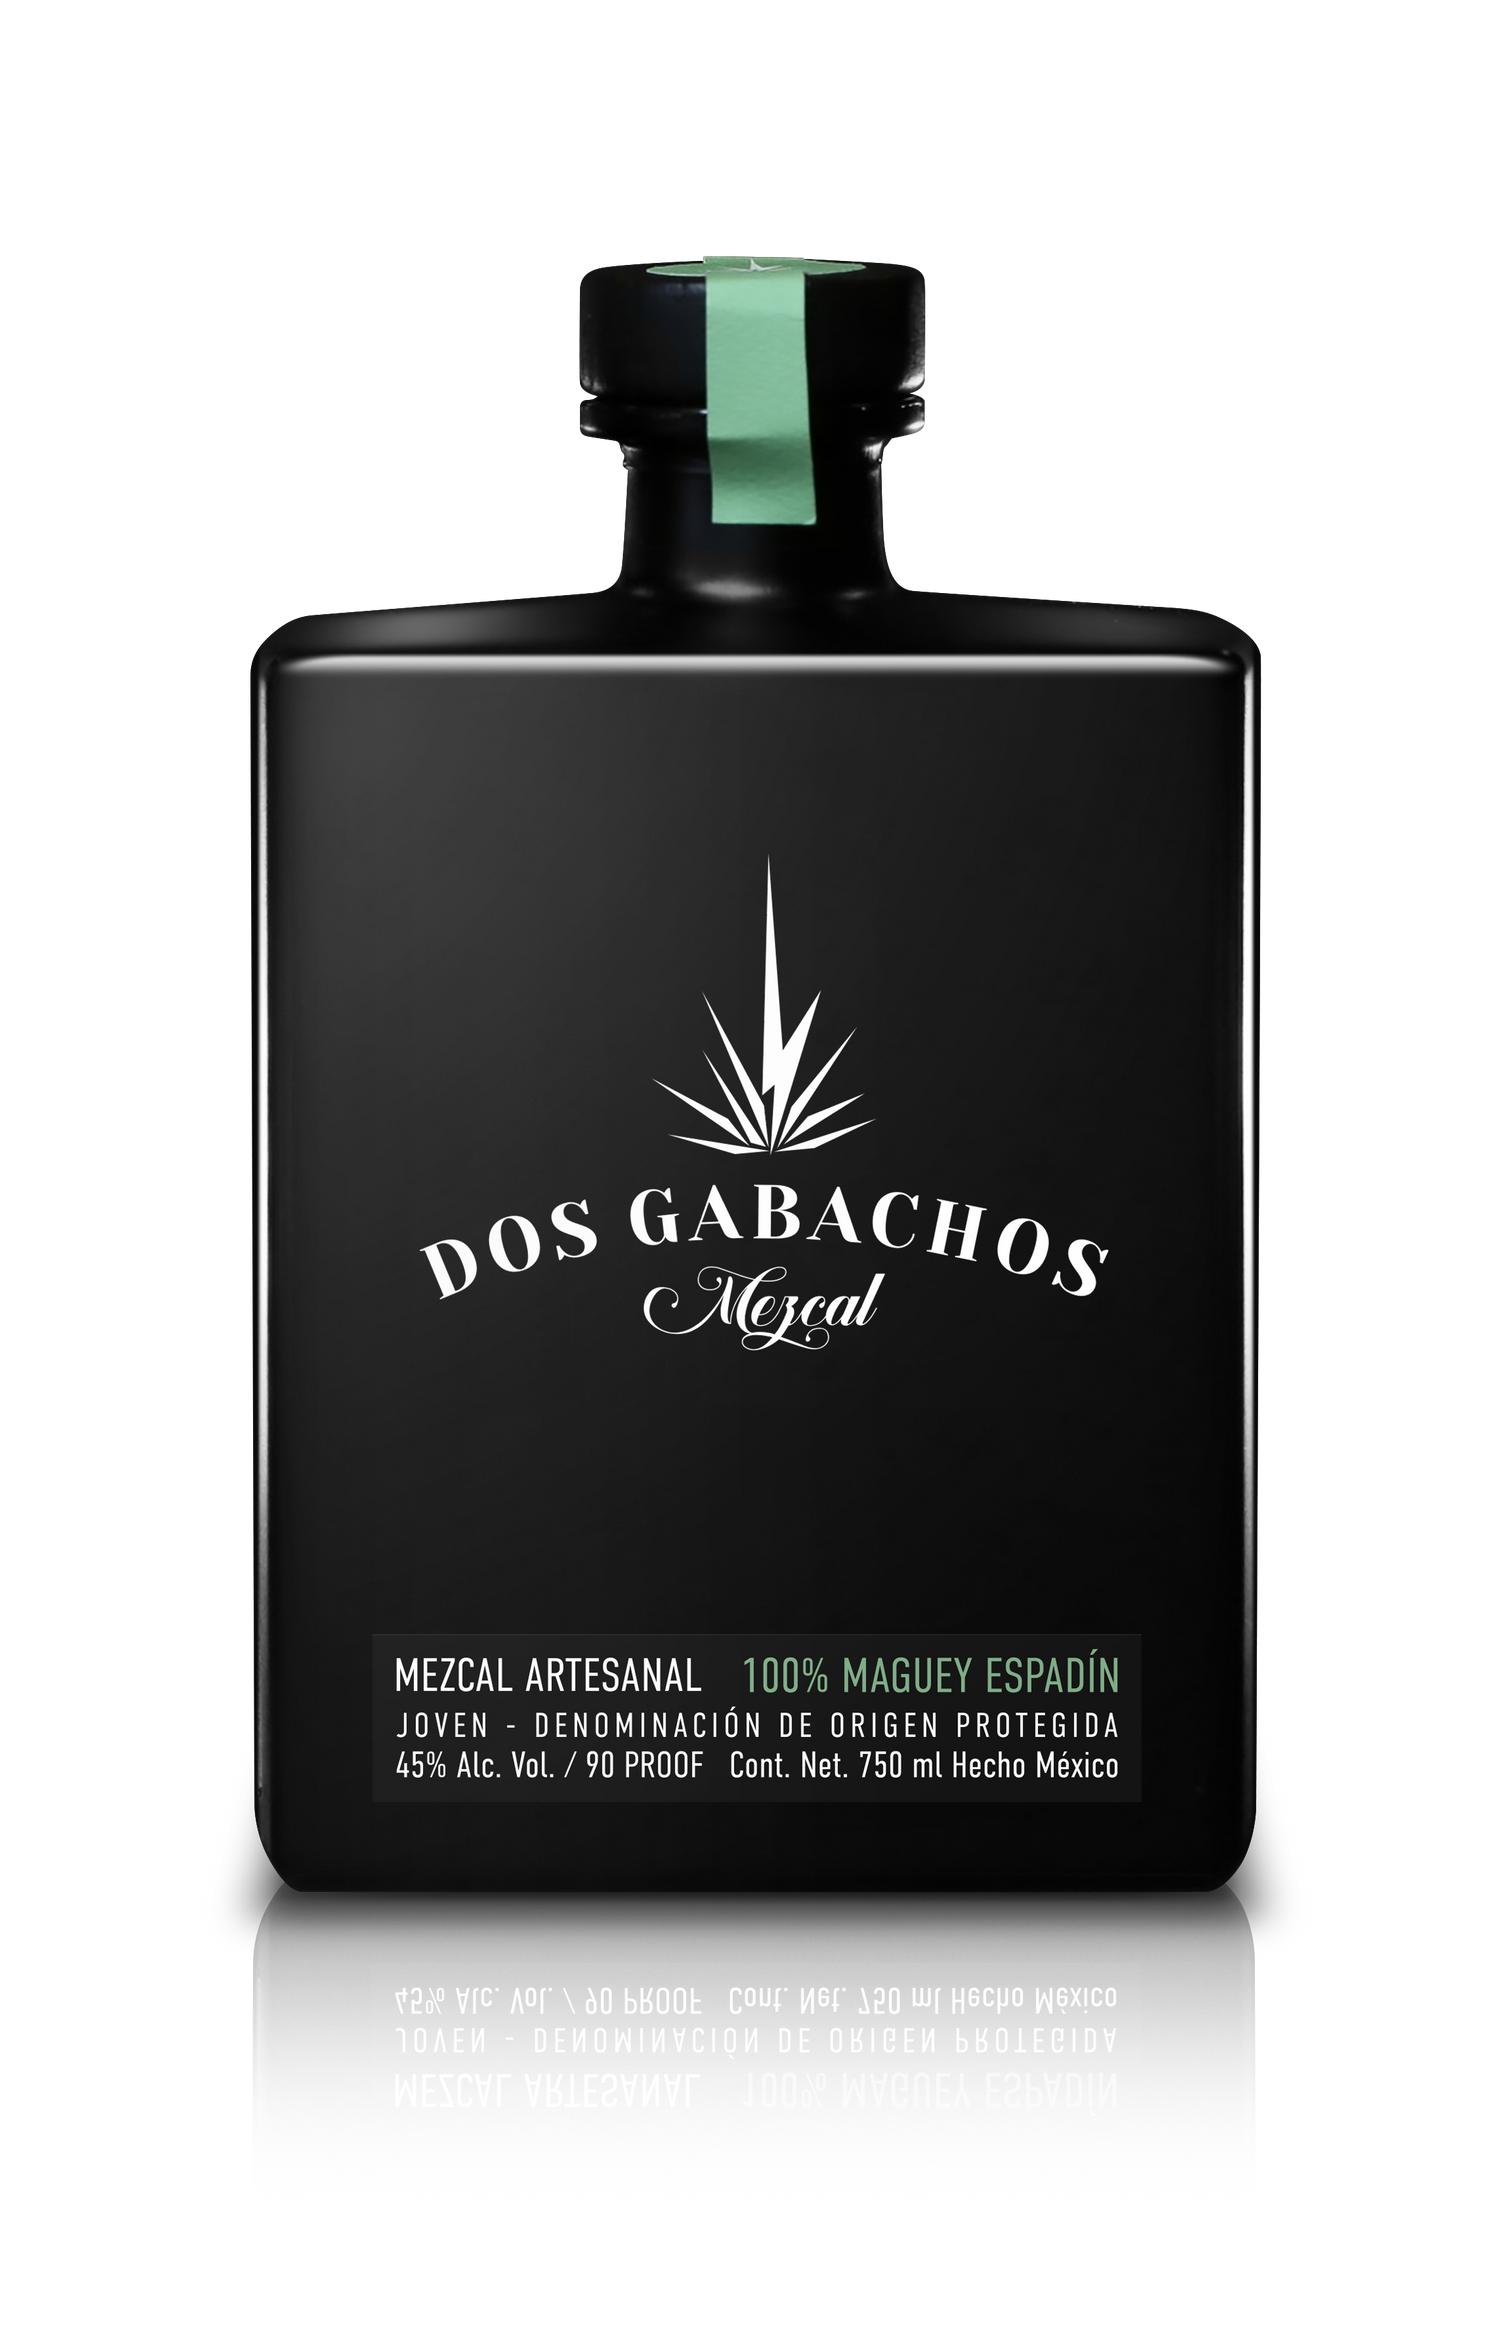 WE ARE a 100% agave Espadín from a small pueblo in Santo Domingo Albarradas in Oaxaca, south-western Mexico. Set in a microclimate semi-tropical zone with citrus overtones, roasted tropical fruit, wood, and spice tasting notes. The fruity yet earthy taste